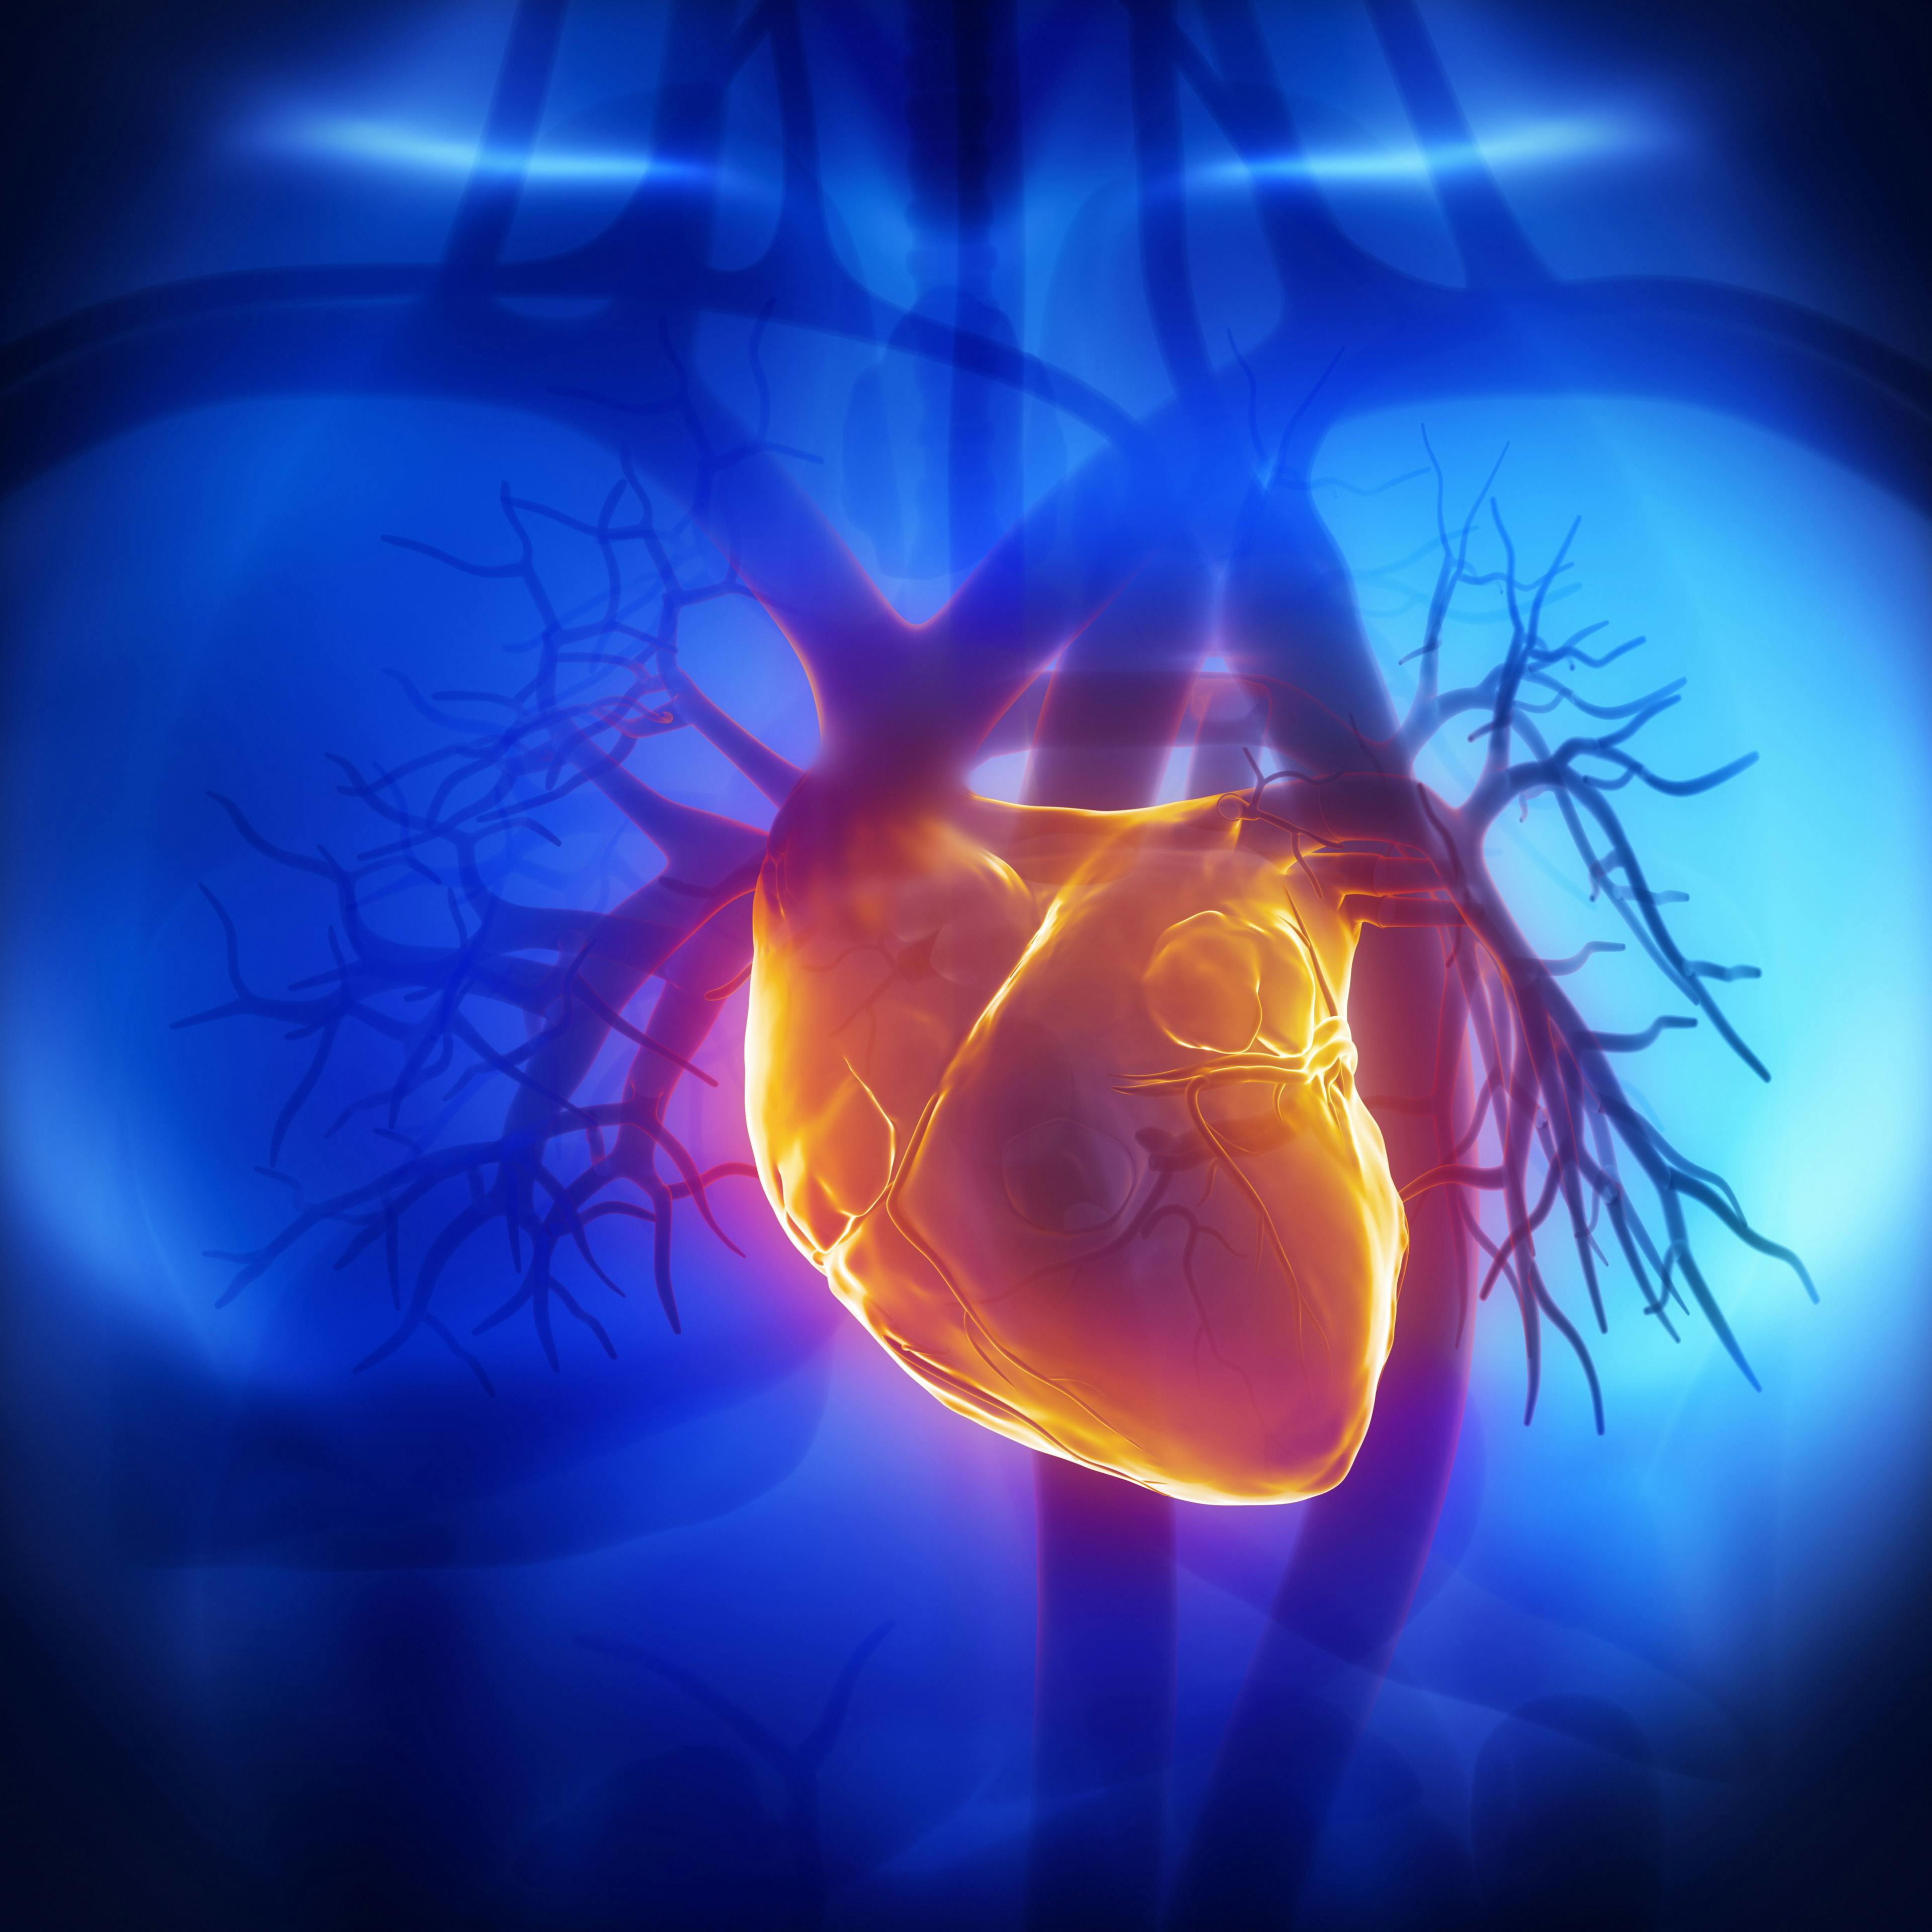 OSA Linked With Increase in Heart Rhythm Disorder Incidence, Adverse Outcomes